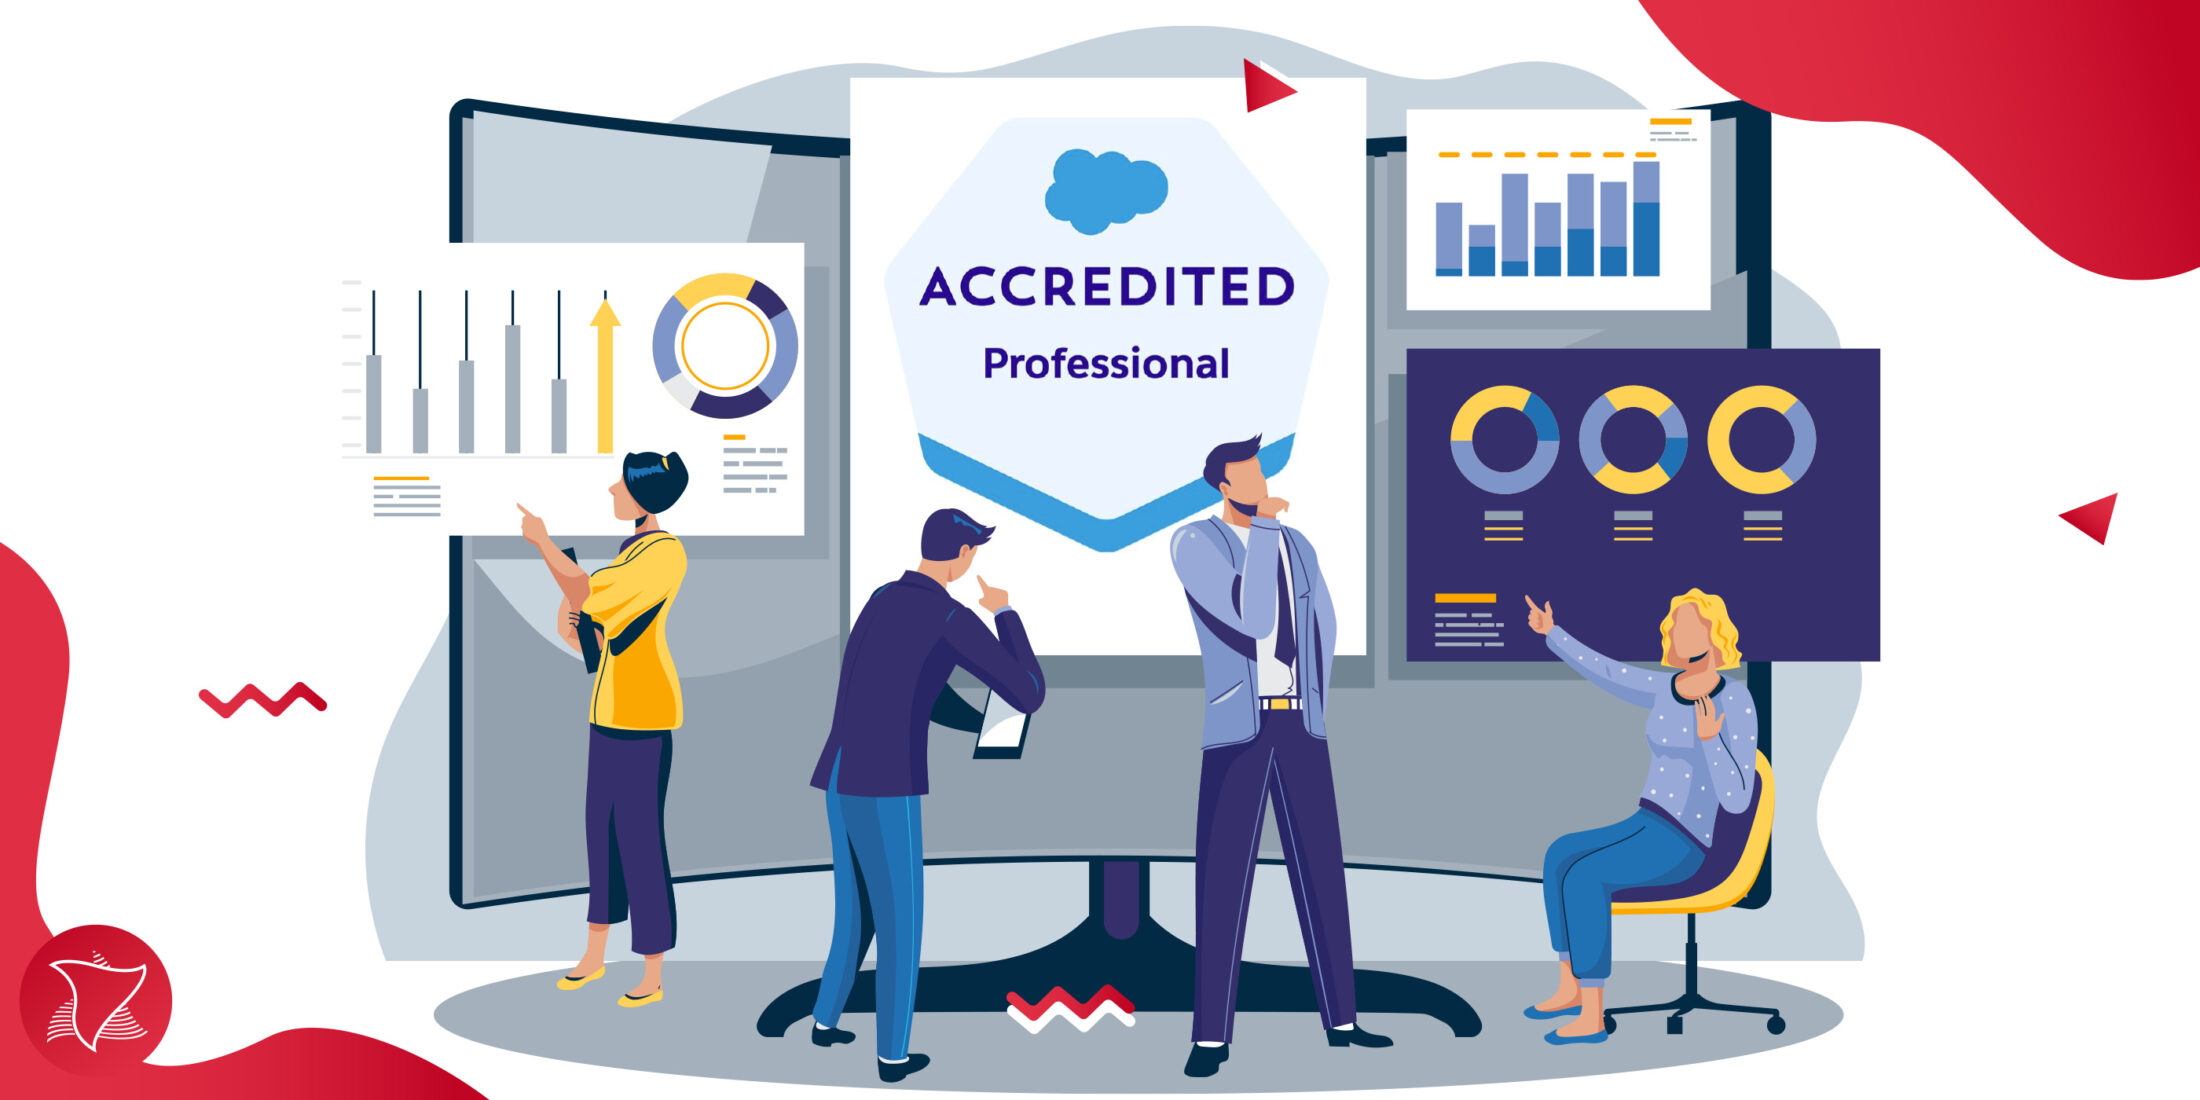 What is a Salesforce Accredited Professional?